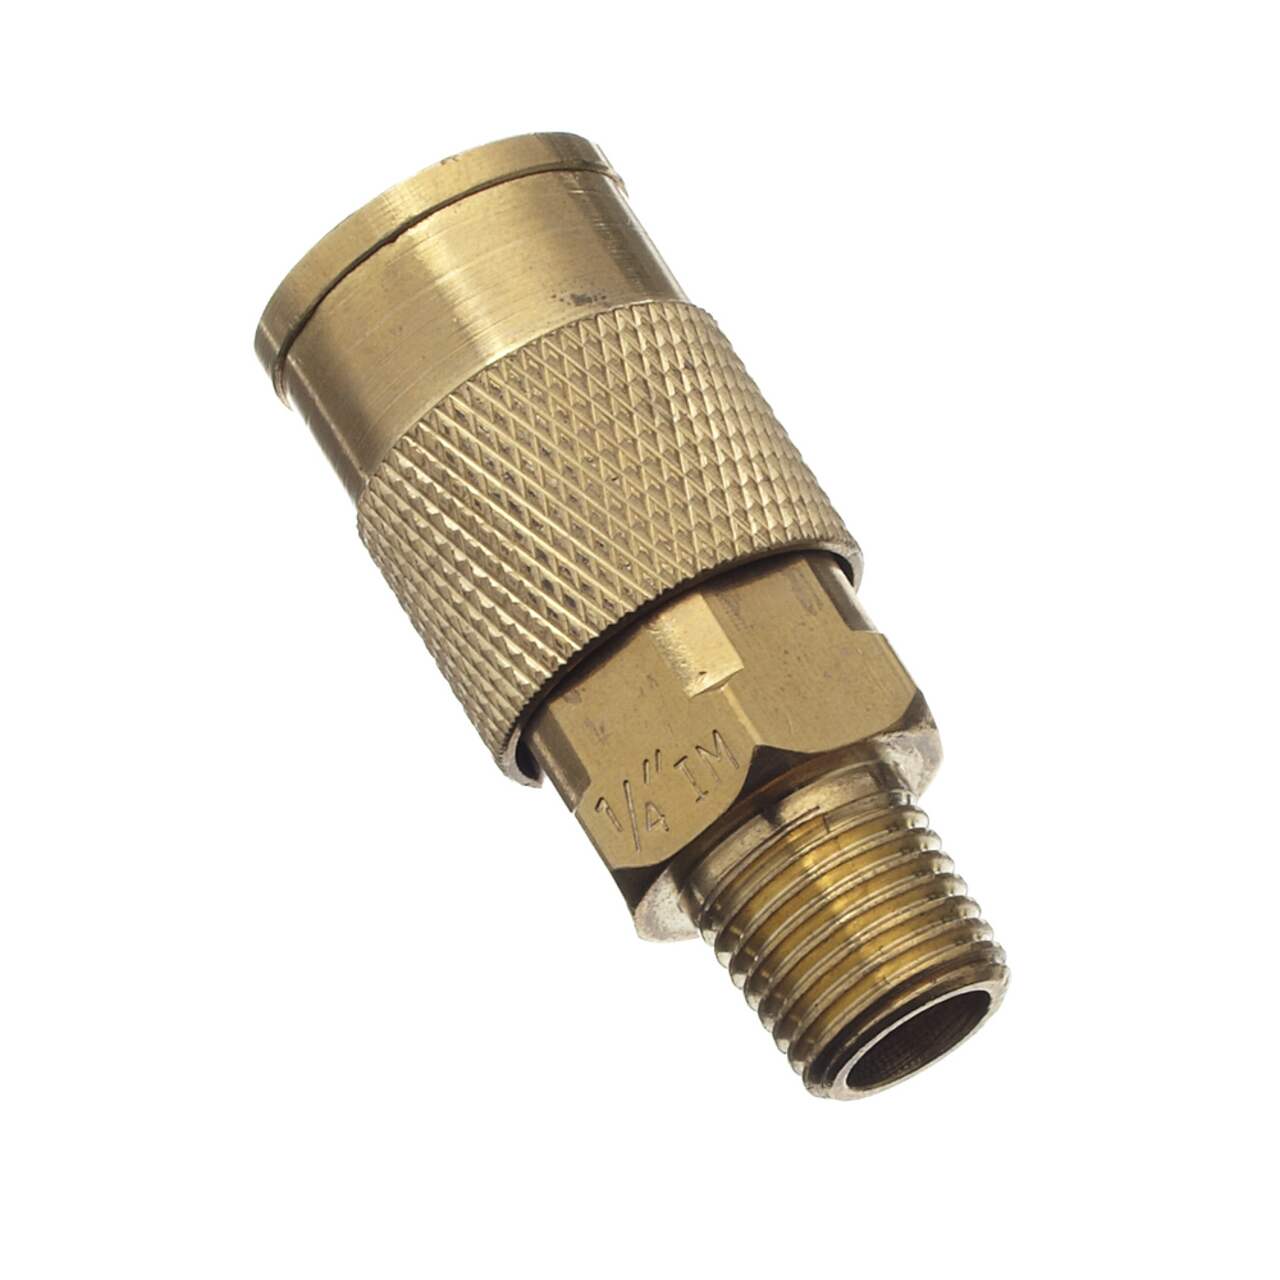 https://media-www.canadiantire.ca/product/fixing/tools/air-tools-accessories/0587845/mastercraft-1-4-inch-quick-connect-brass-coupler-9b3d534d-66f0-4a6f-9684-fdcdeeb3caea.png?imdensity=1&imwidth=640&impolicy=mZoom